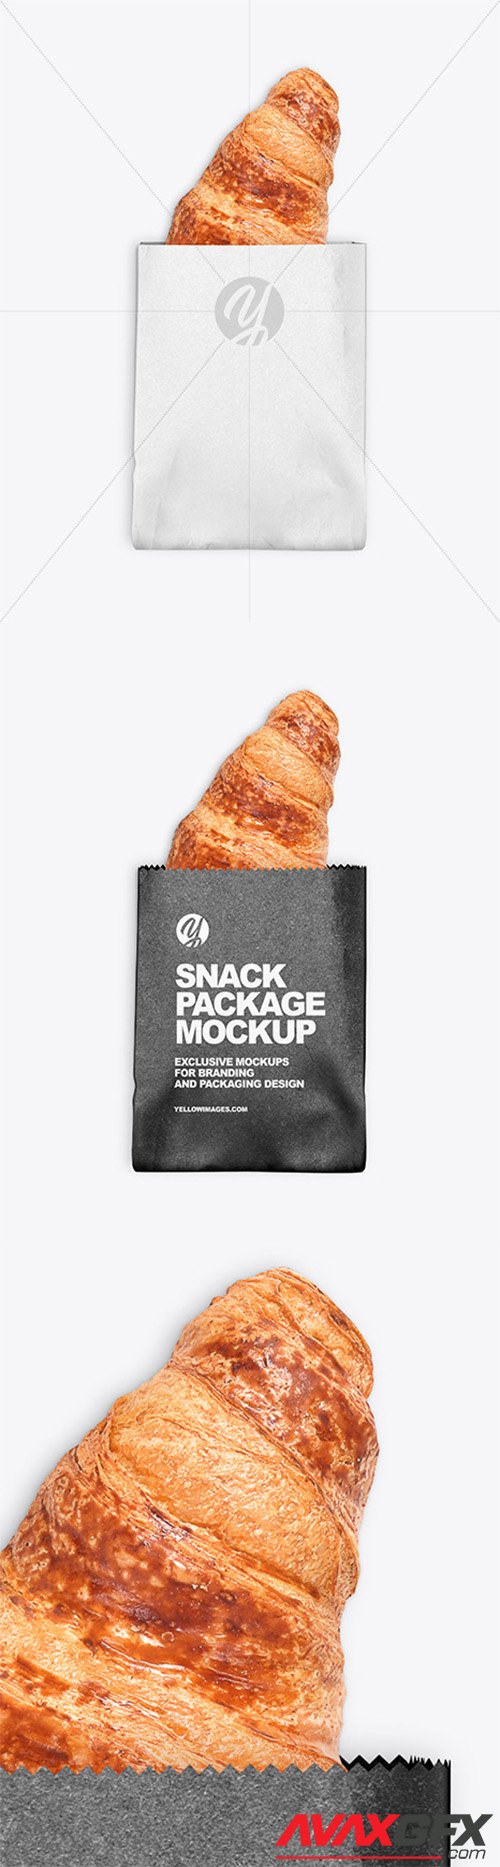 Download Kraft Package W Croissant Mockup 52698 Avaxgfx All Downloads That You Need In One Place Graphic From Nitroflare Rapidgator PSD Mockup Templates